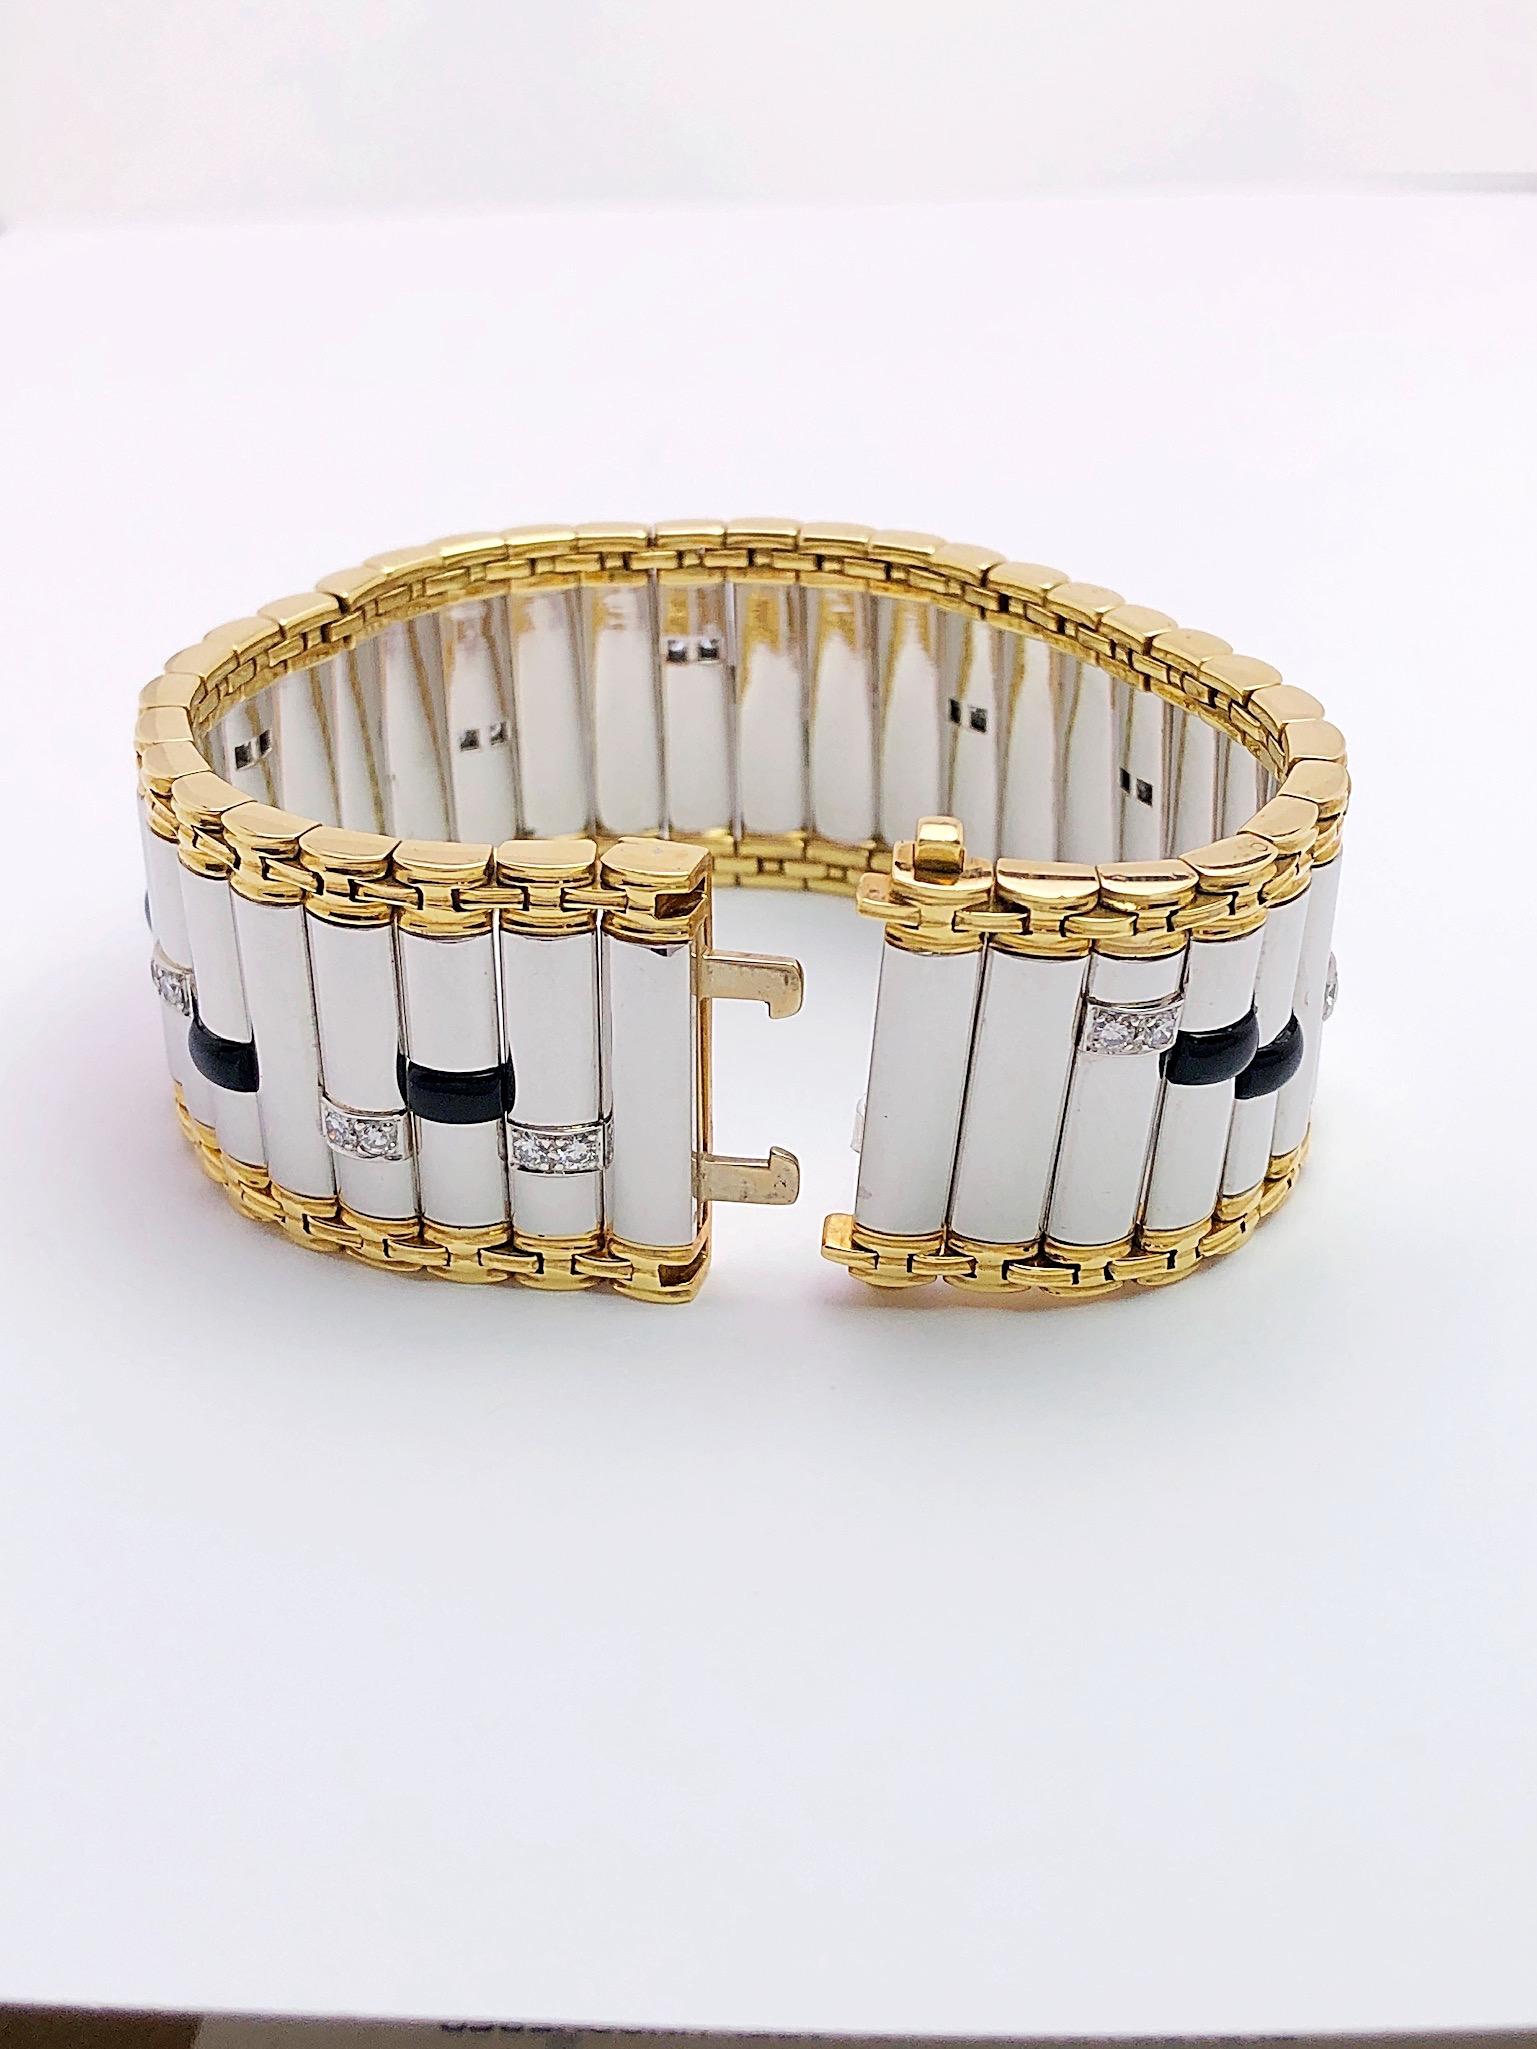 This platinum and 18 karat bracelet is an iconic representation of the artist, Michael Bondanza, world renowned  for his work in precious metals. Each Michael Bondanza piece is expertly hand crafted in the heart of New York City. 35 hand made links